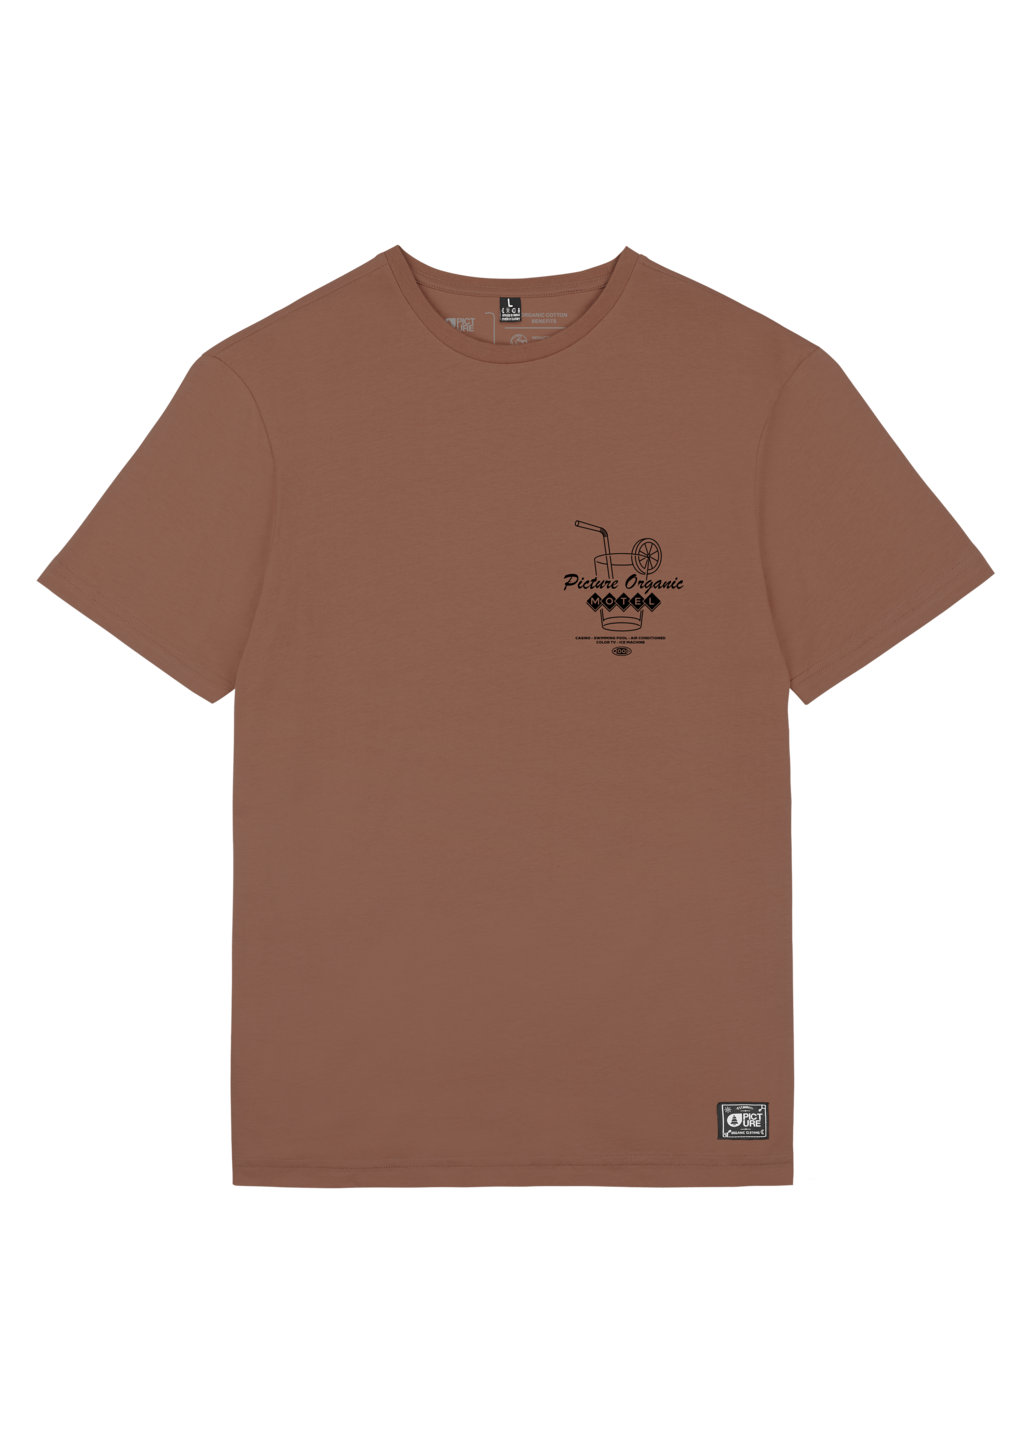 Picture Vacation Tee shirt Rustic brown